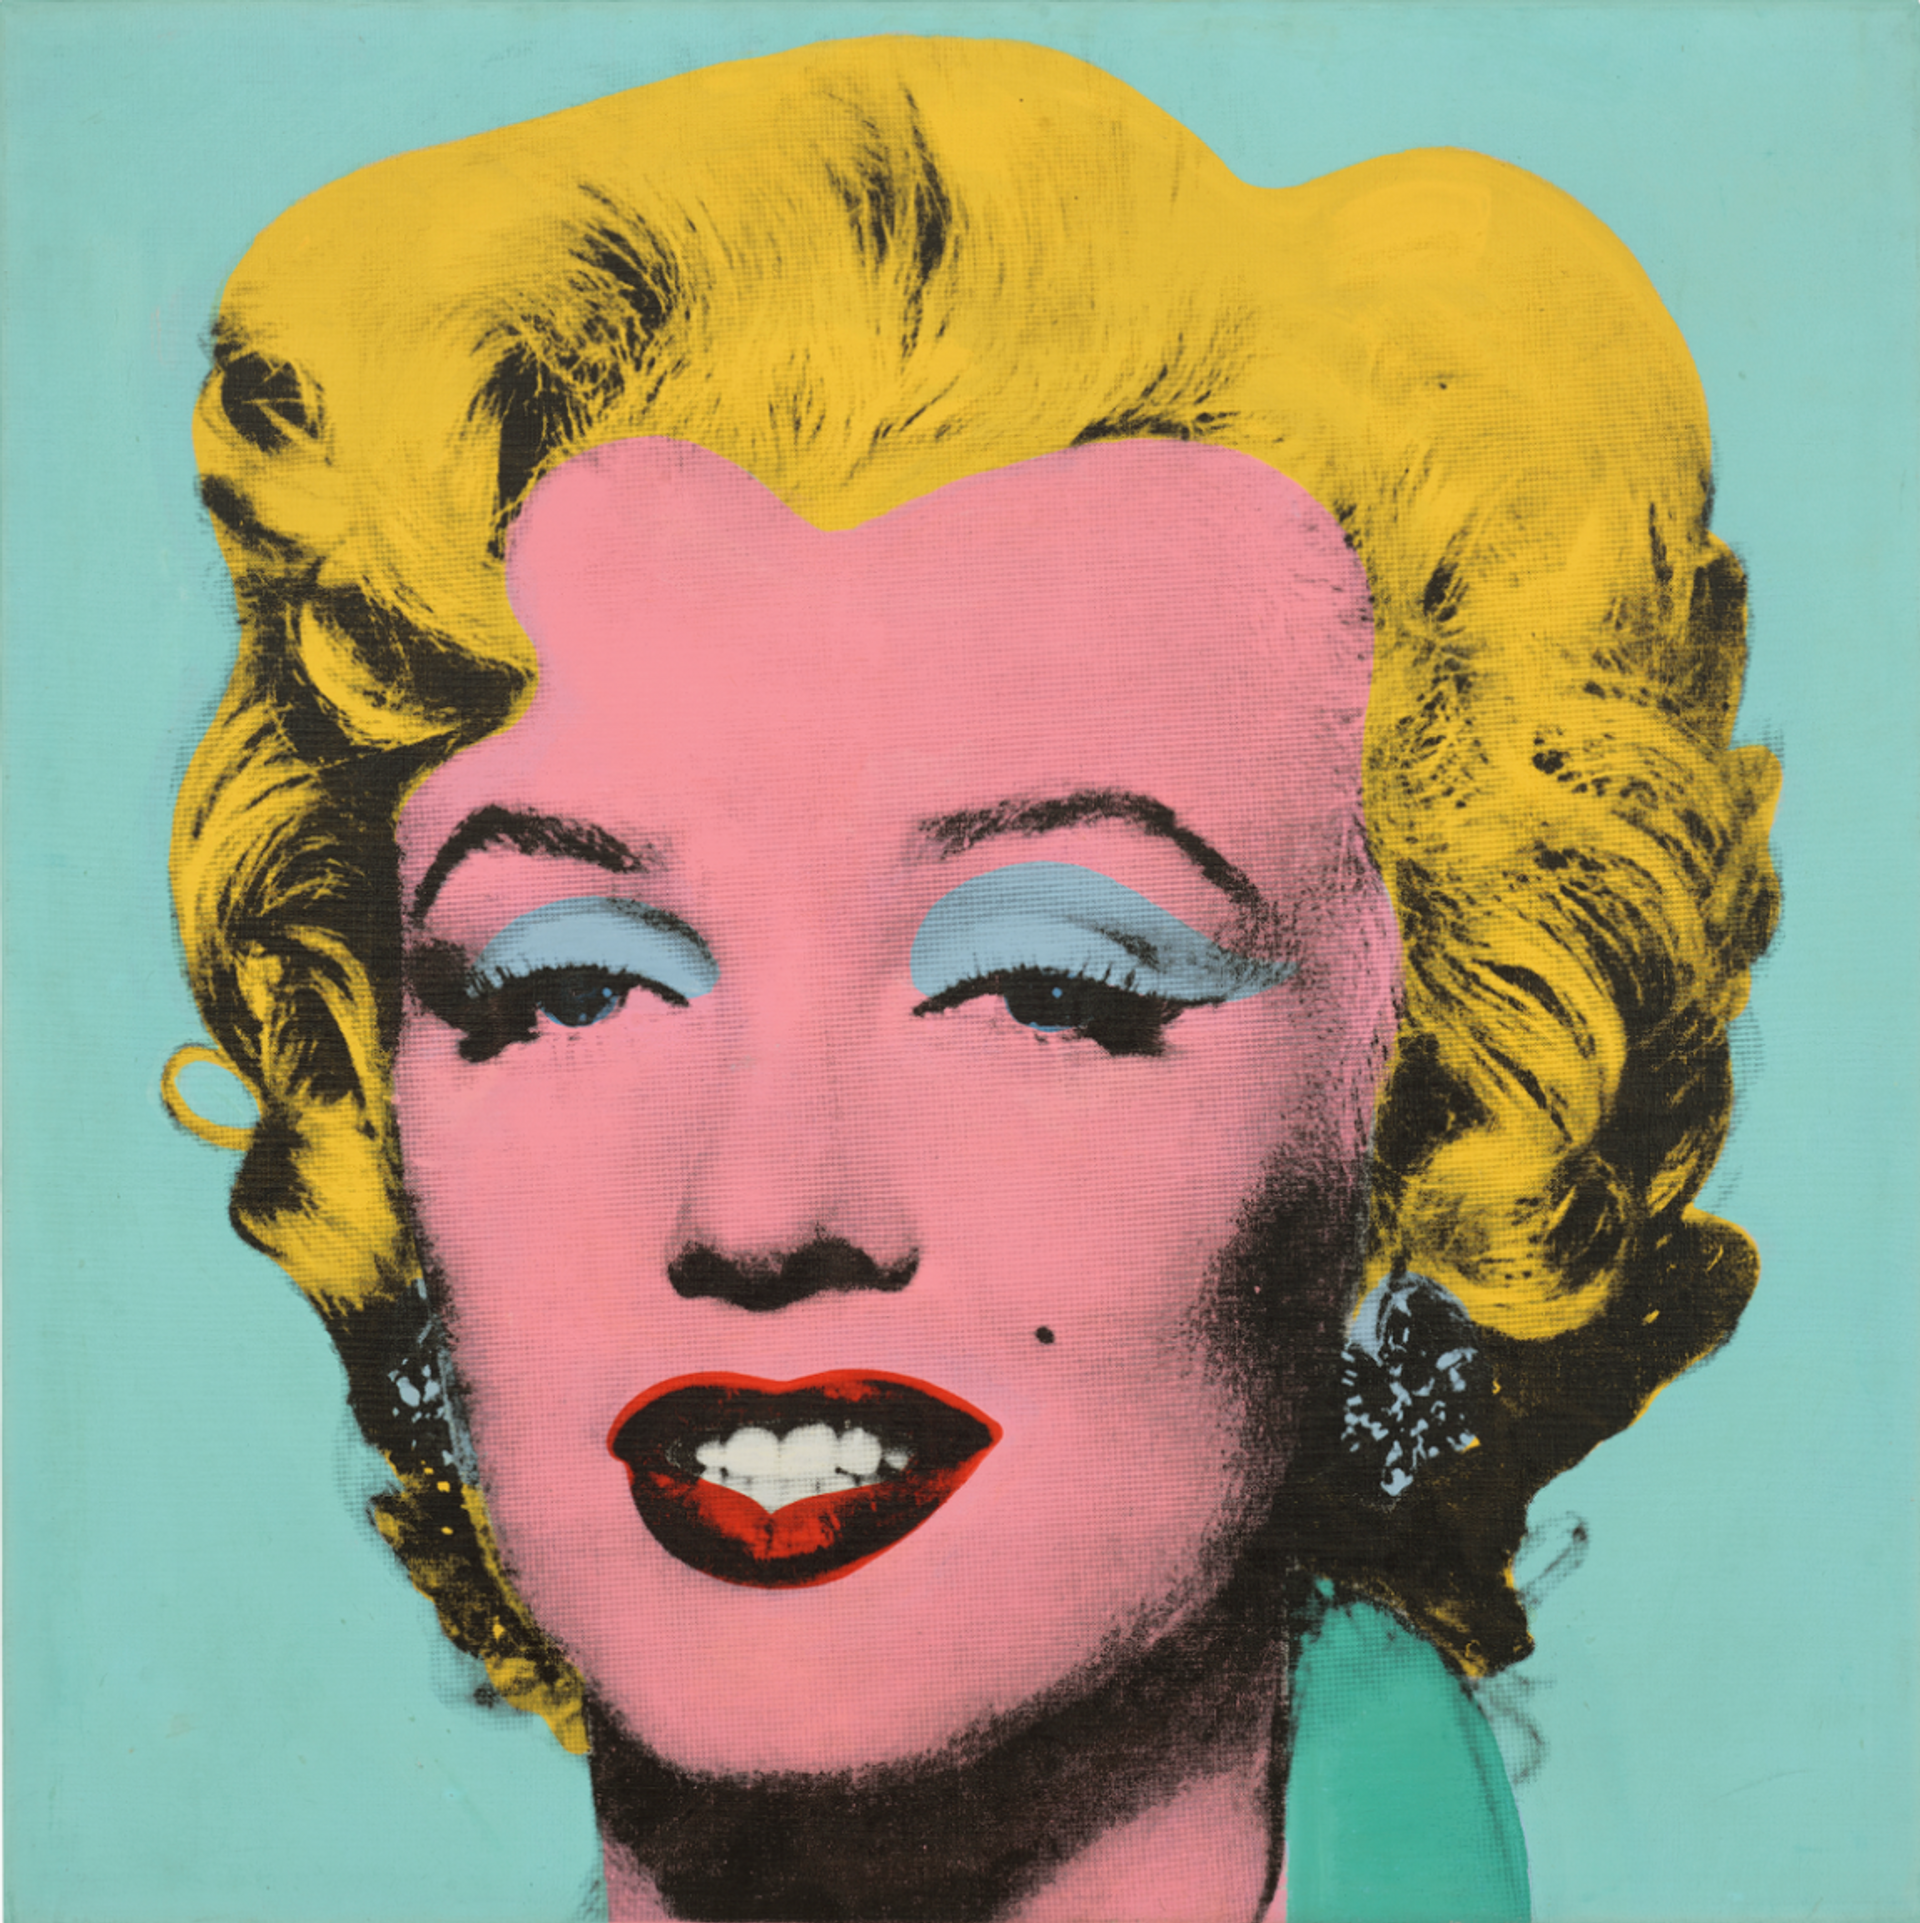 Pop art style image of Marilyn Monroe with bright yellow hair on a bright sage blue background